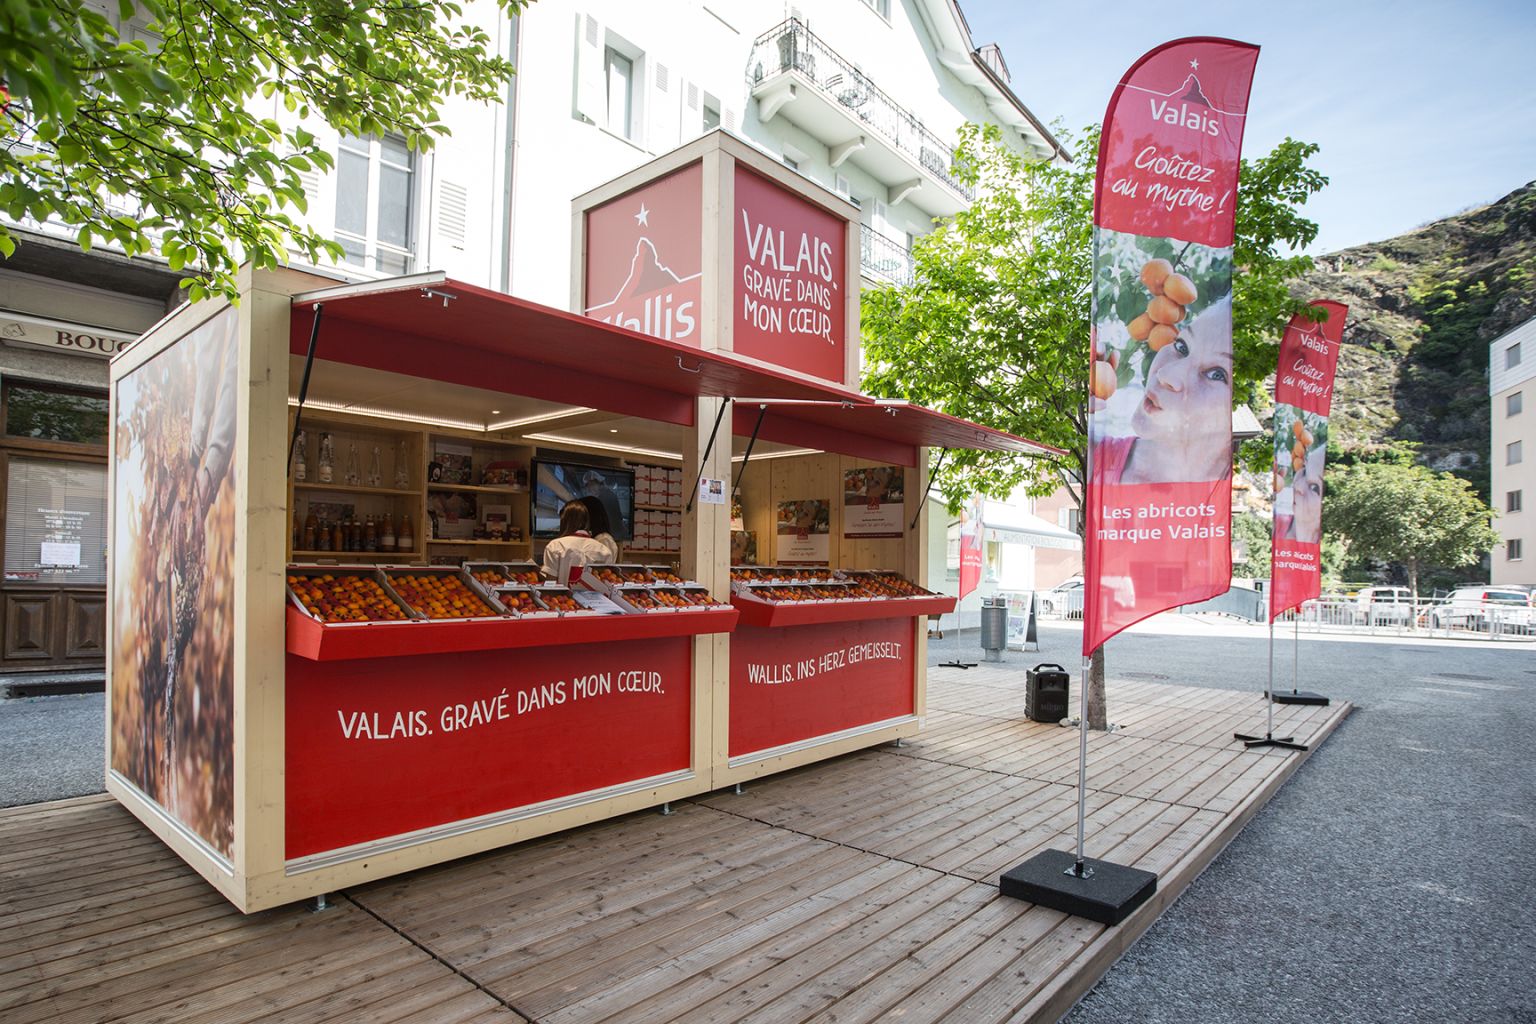 The apricots stand of Valais brand at Place du Midi in Sion.